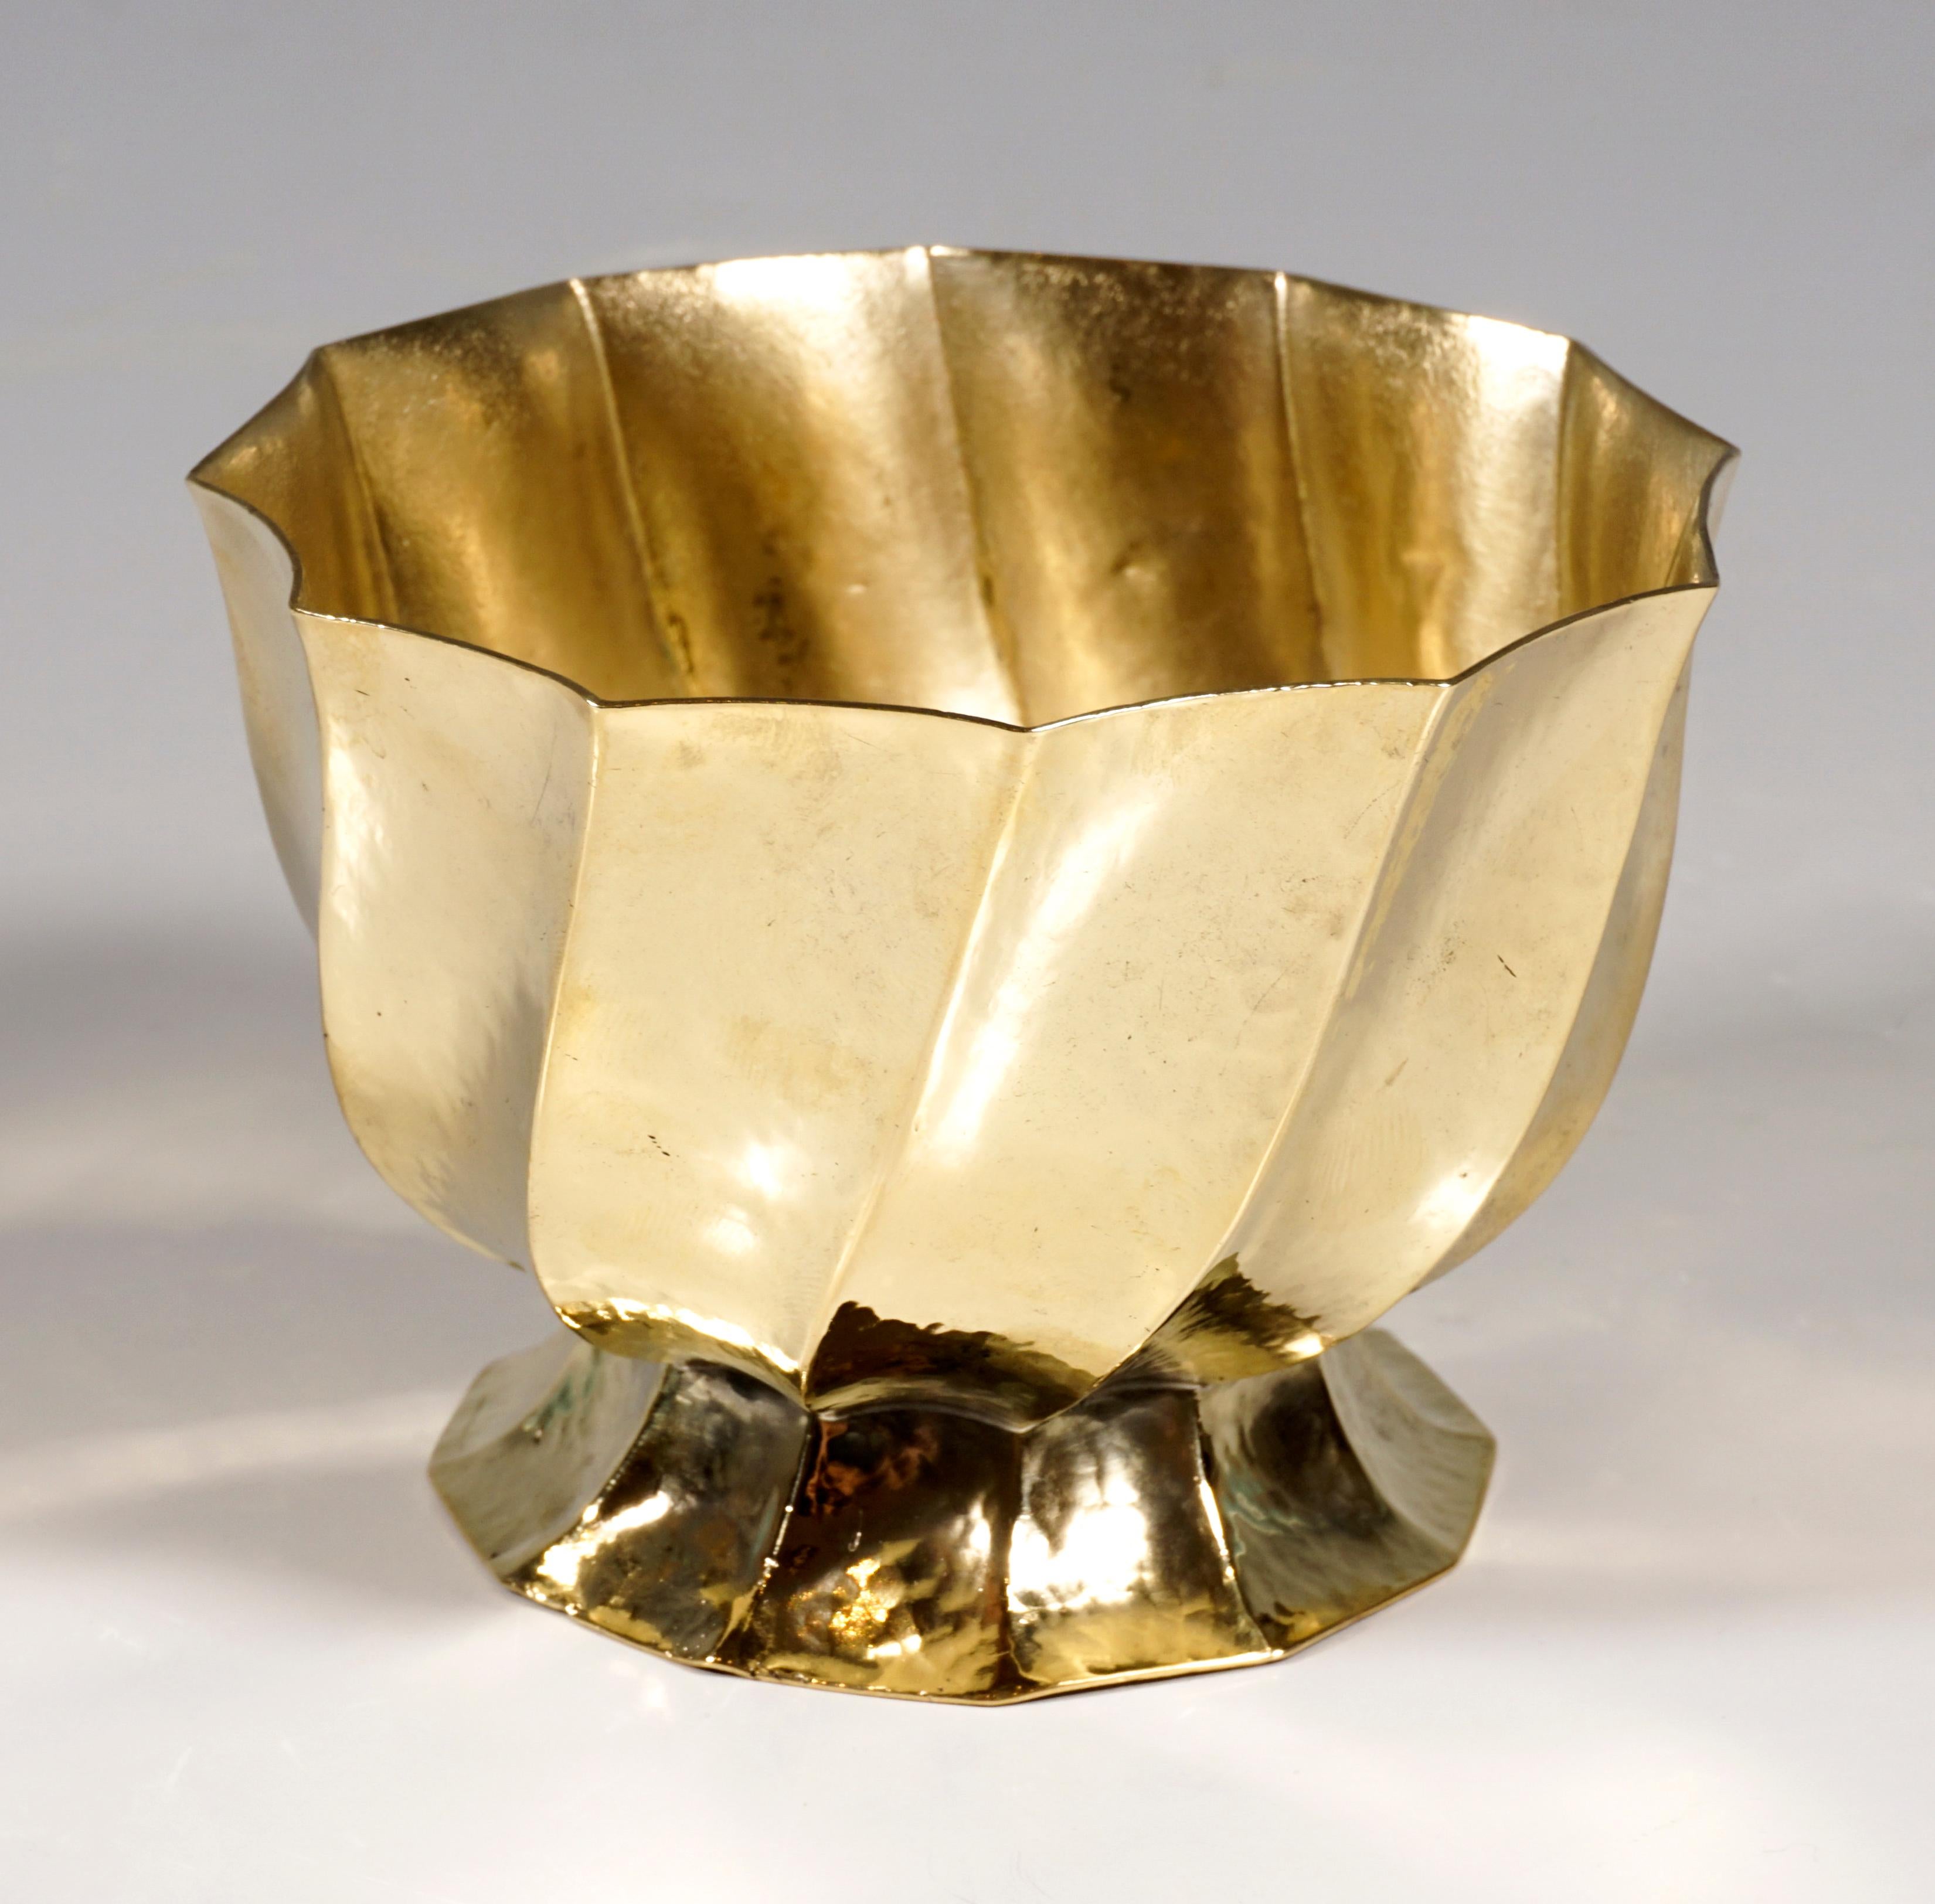 Small cup made of embossed and folded brass with a light hammered decoration. Design of this cigarette holder as part of a smoking set, consisting of serving plate, ashtray, cigarette and cigar holder by Josef Hoffmann, circa 1920.

Manufactory: